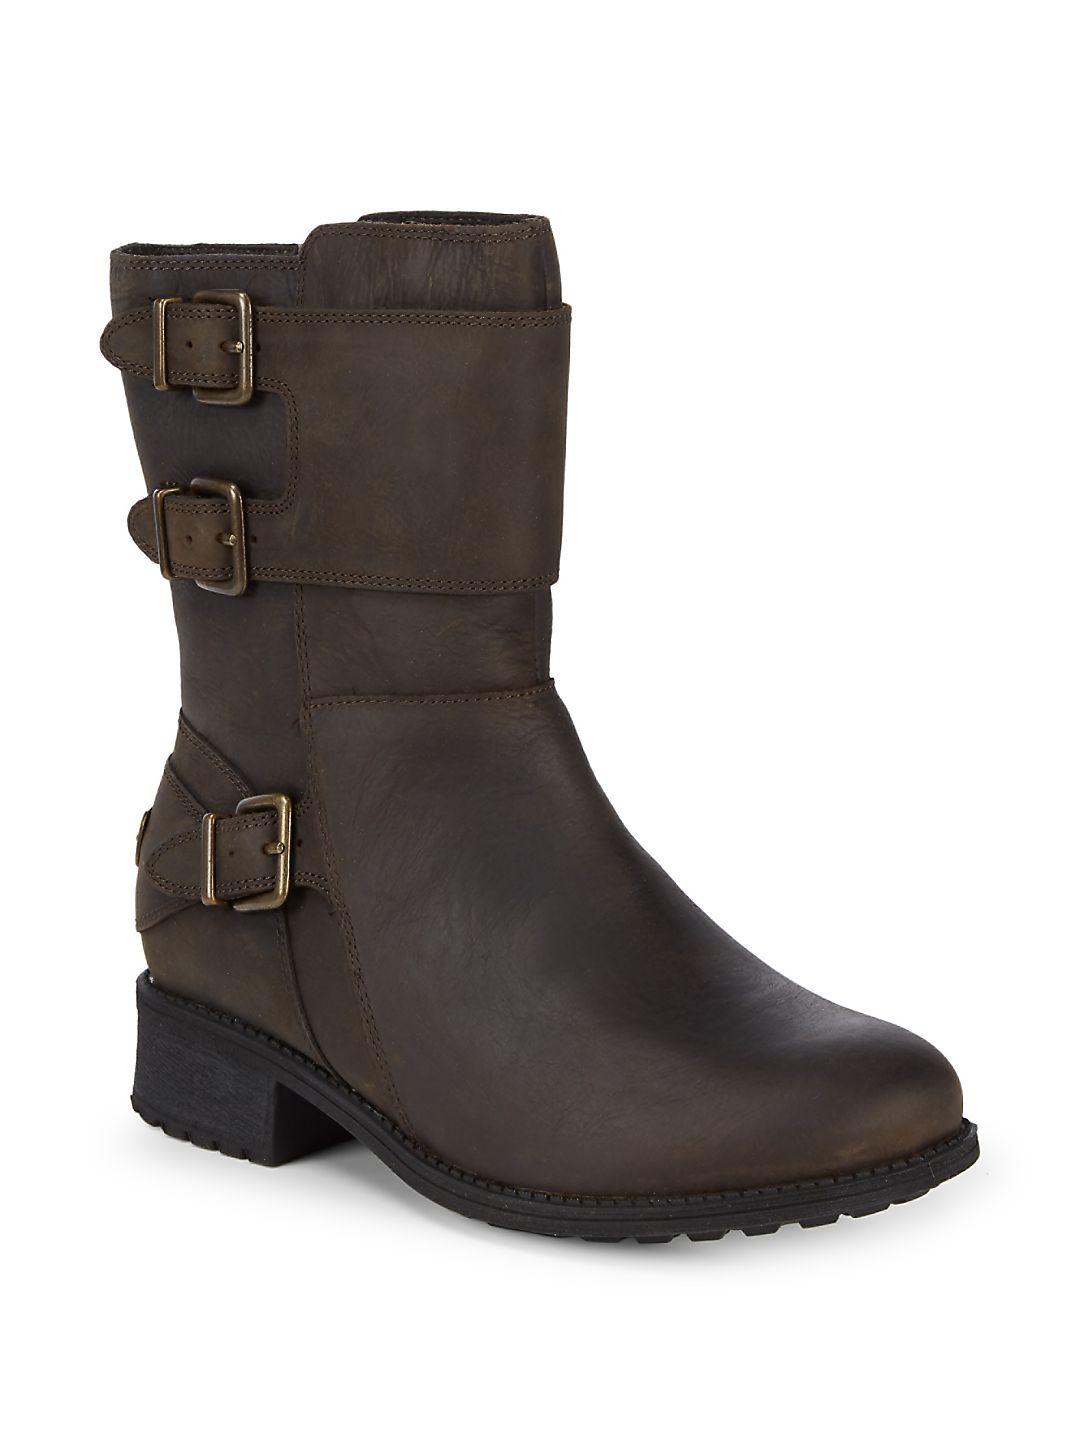 UGG Wilcox Leather Moto Boots in Brown Lyst